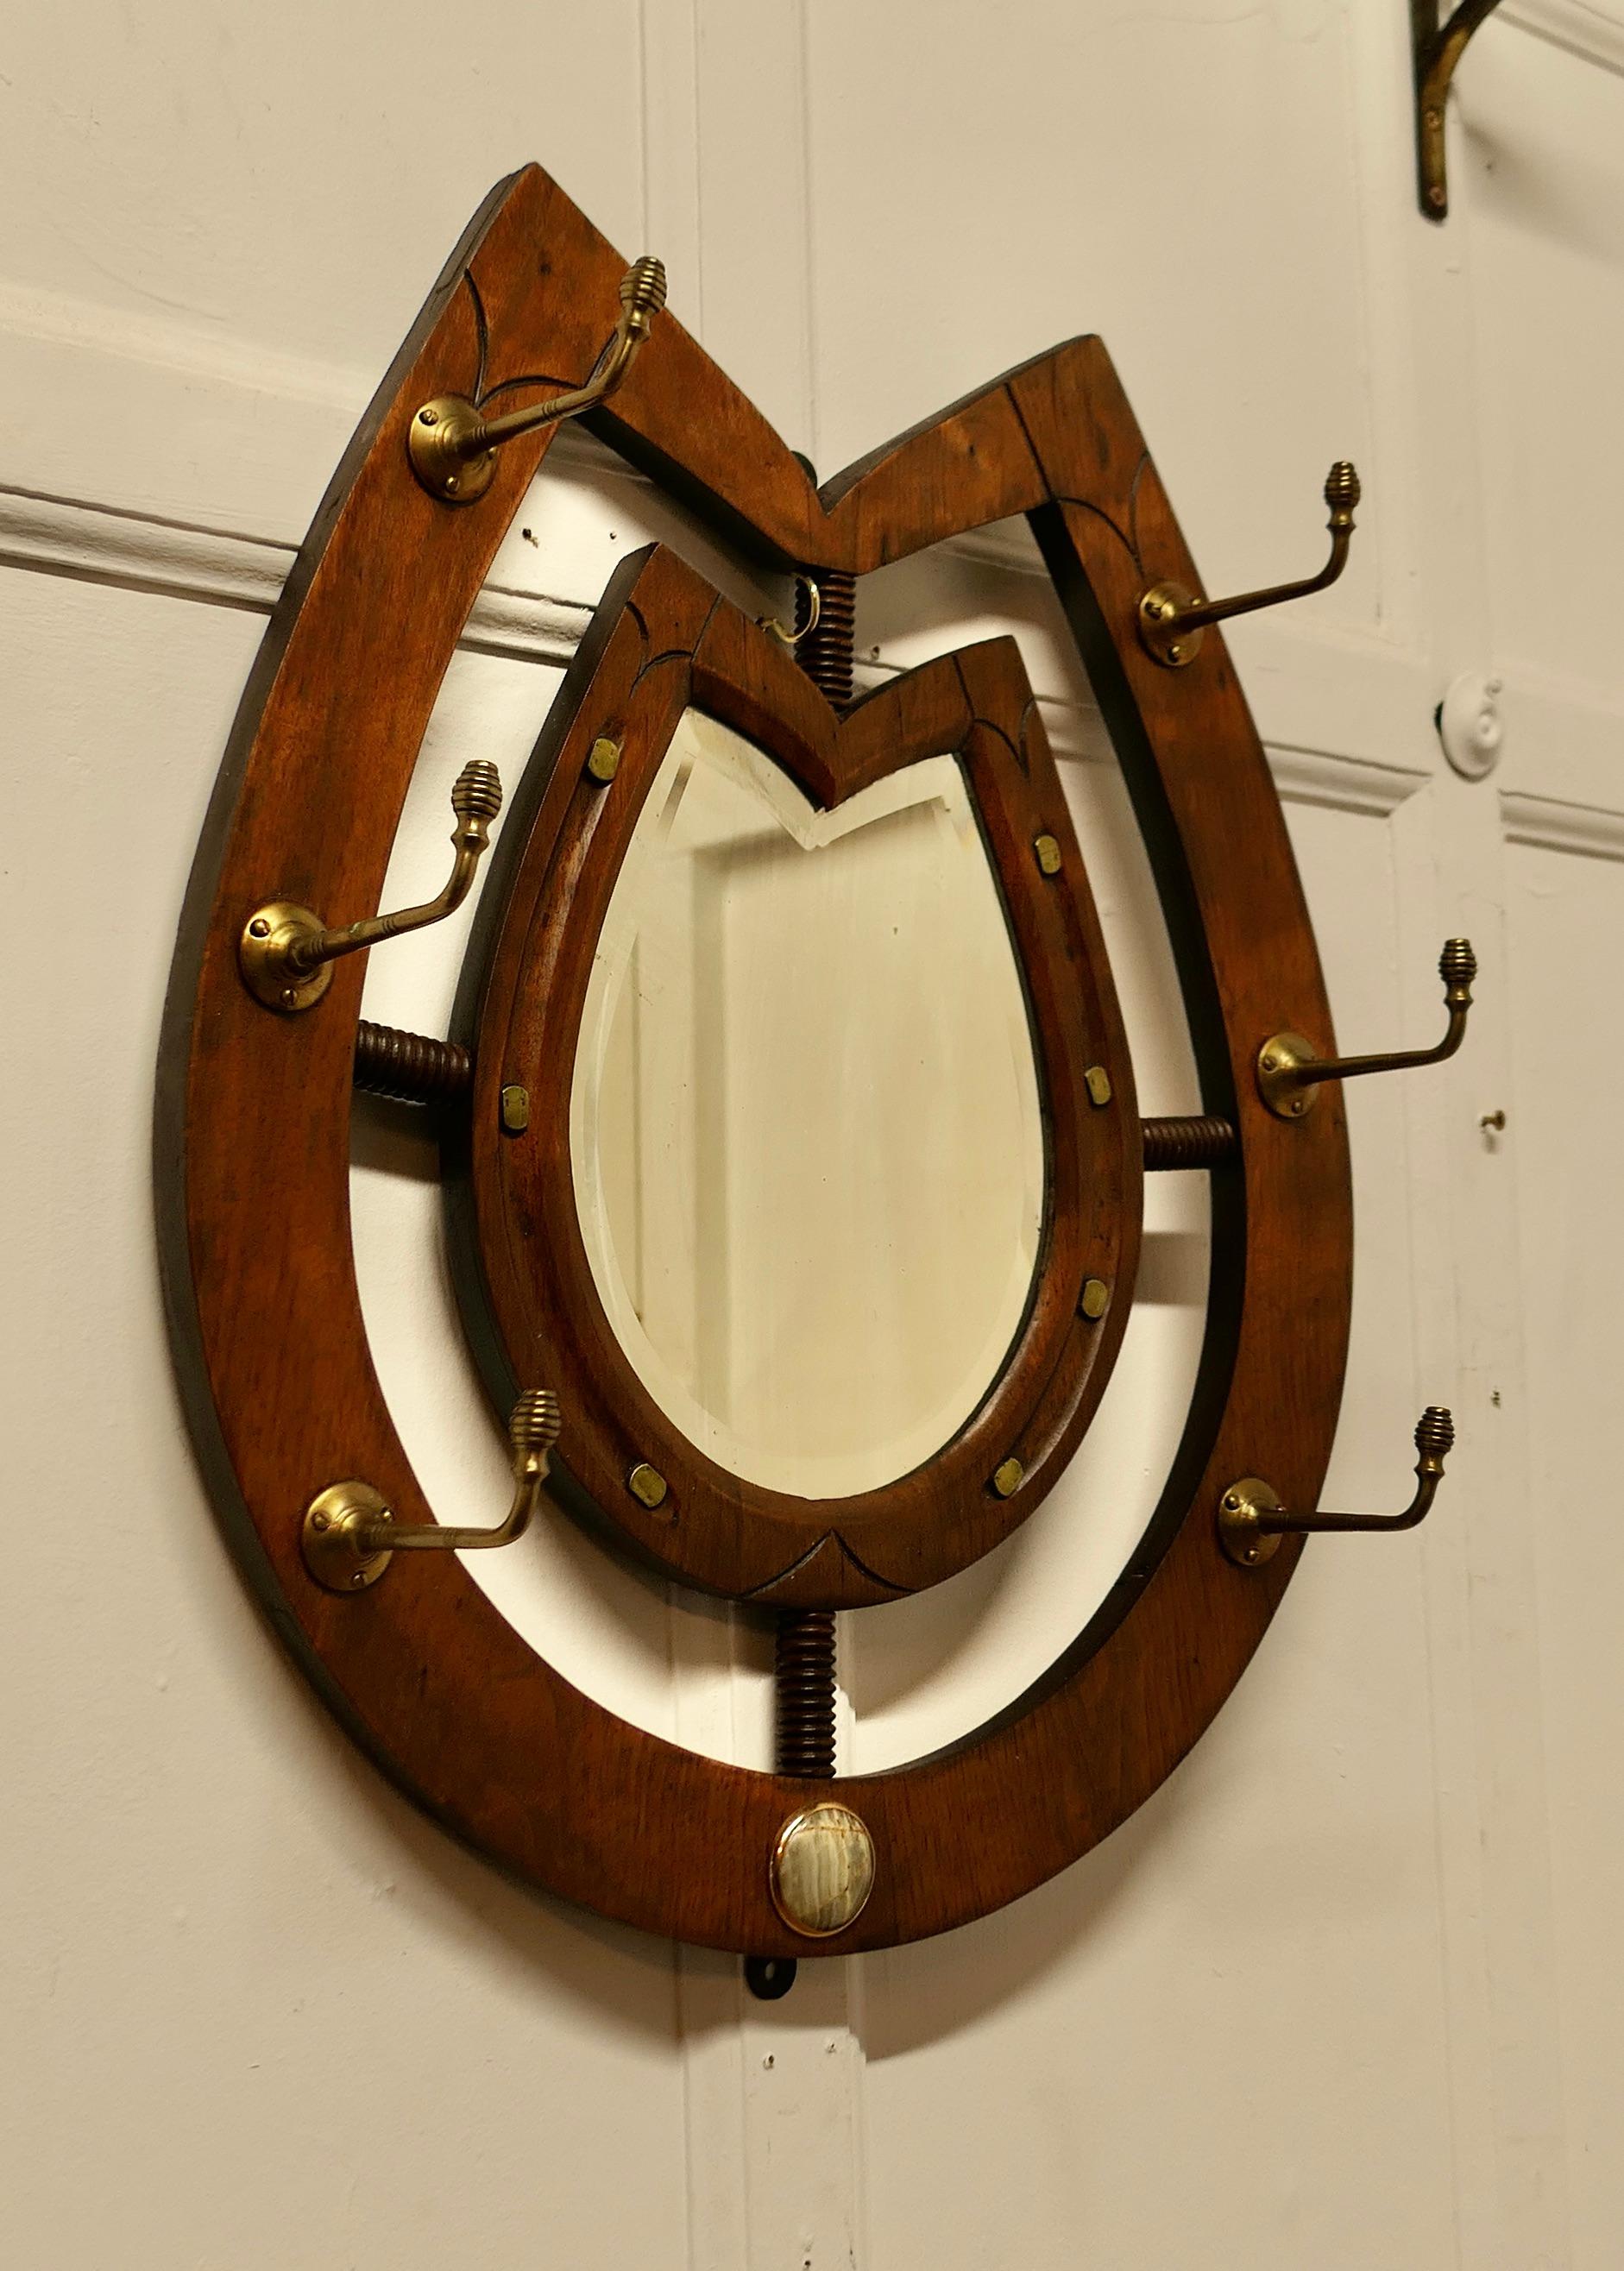 Irish Arts and Crafts Mirrored Horseshoe Coat and Tack Rack 

A fine quality piece and a very attractive design, a double carved Horseshoe Coat and Tack Rack with a bevelled mirror to the centre

Beautifully made with brass farriers nails around the